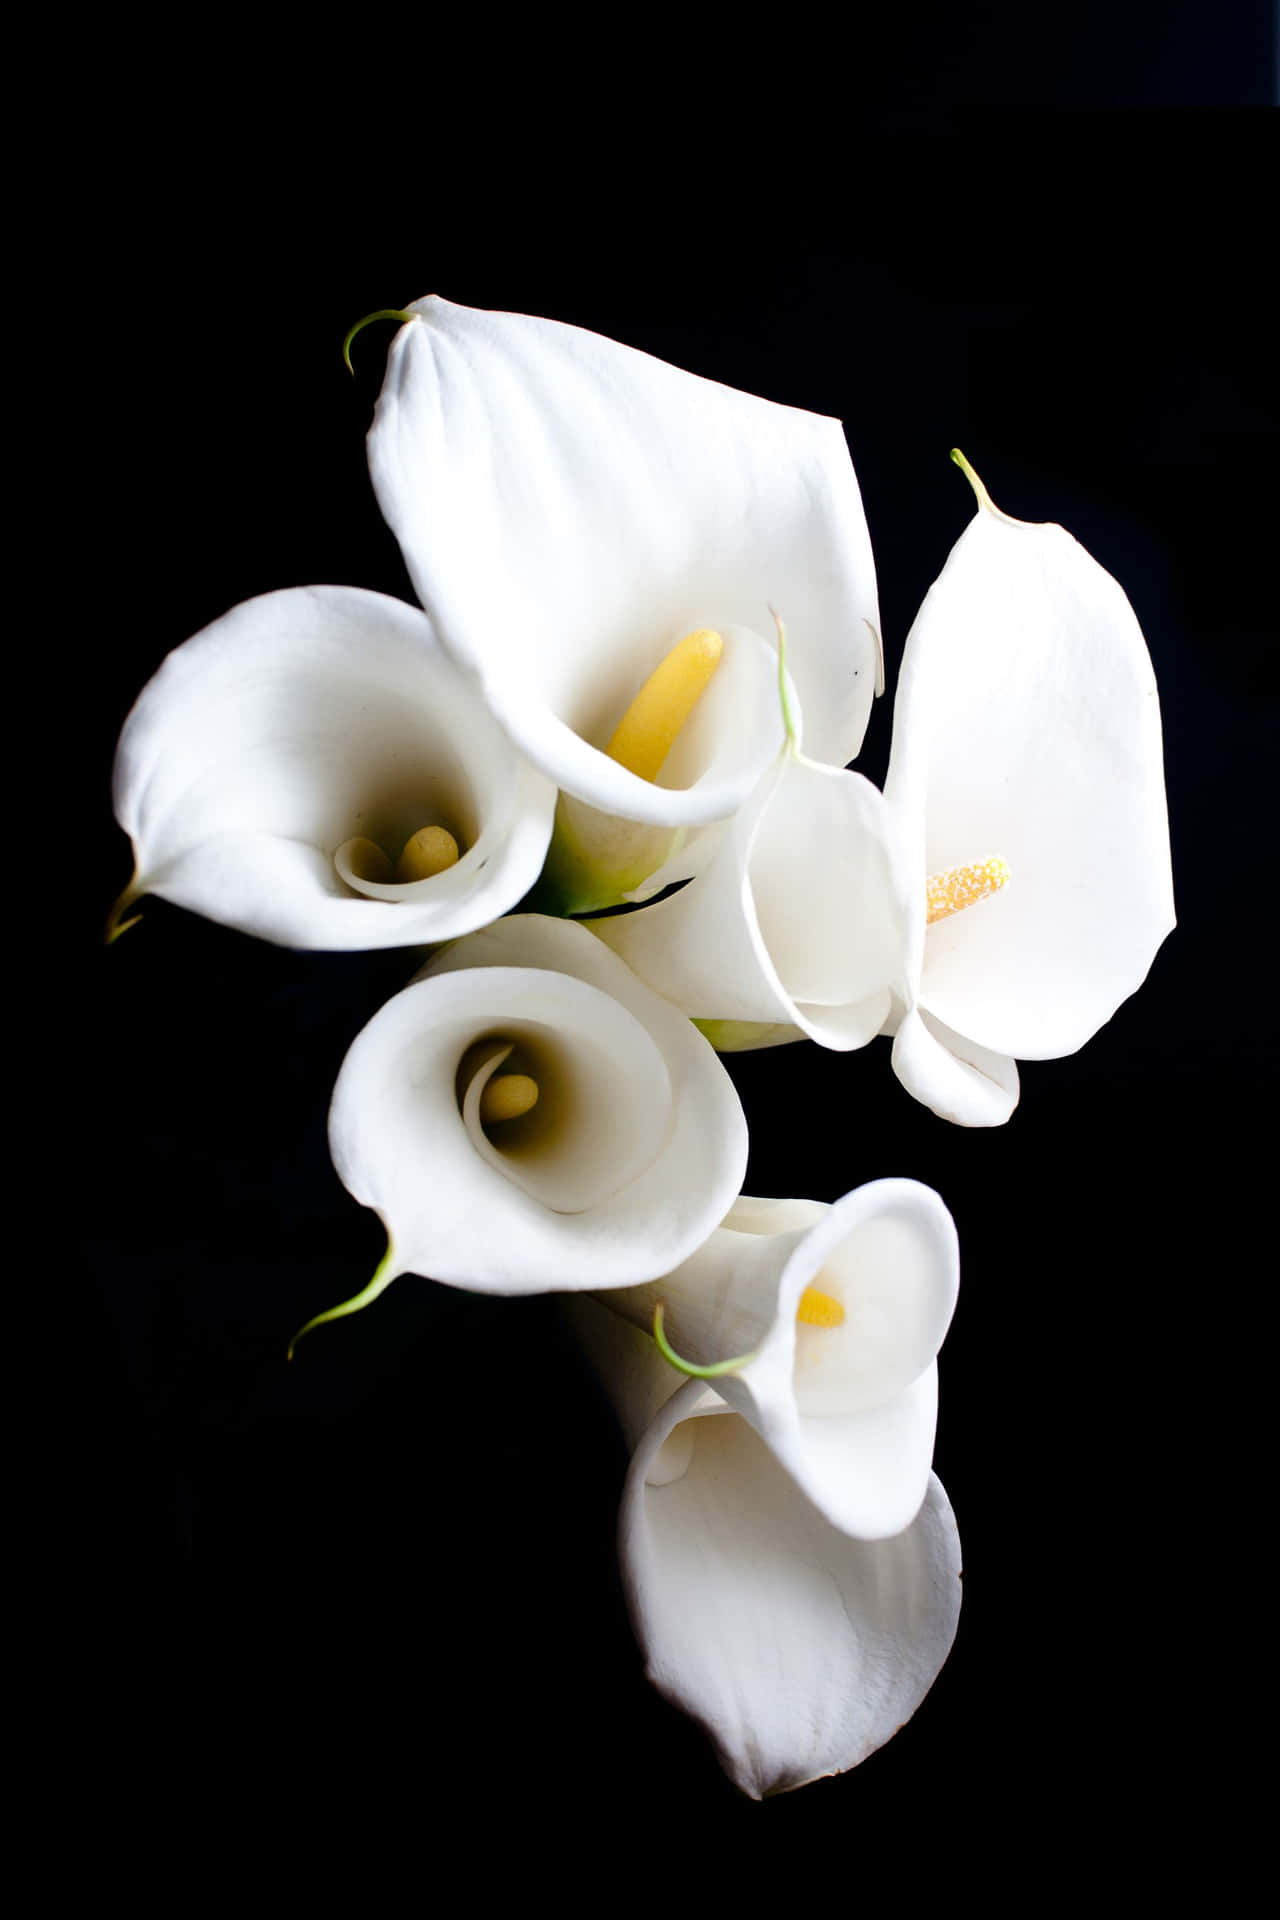 The beauty of a white lily in bloom